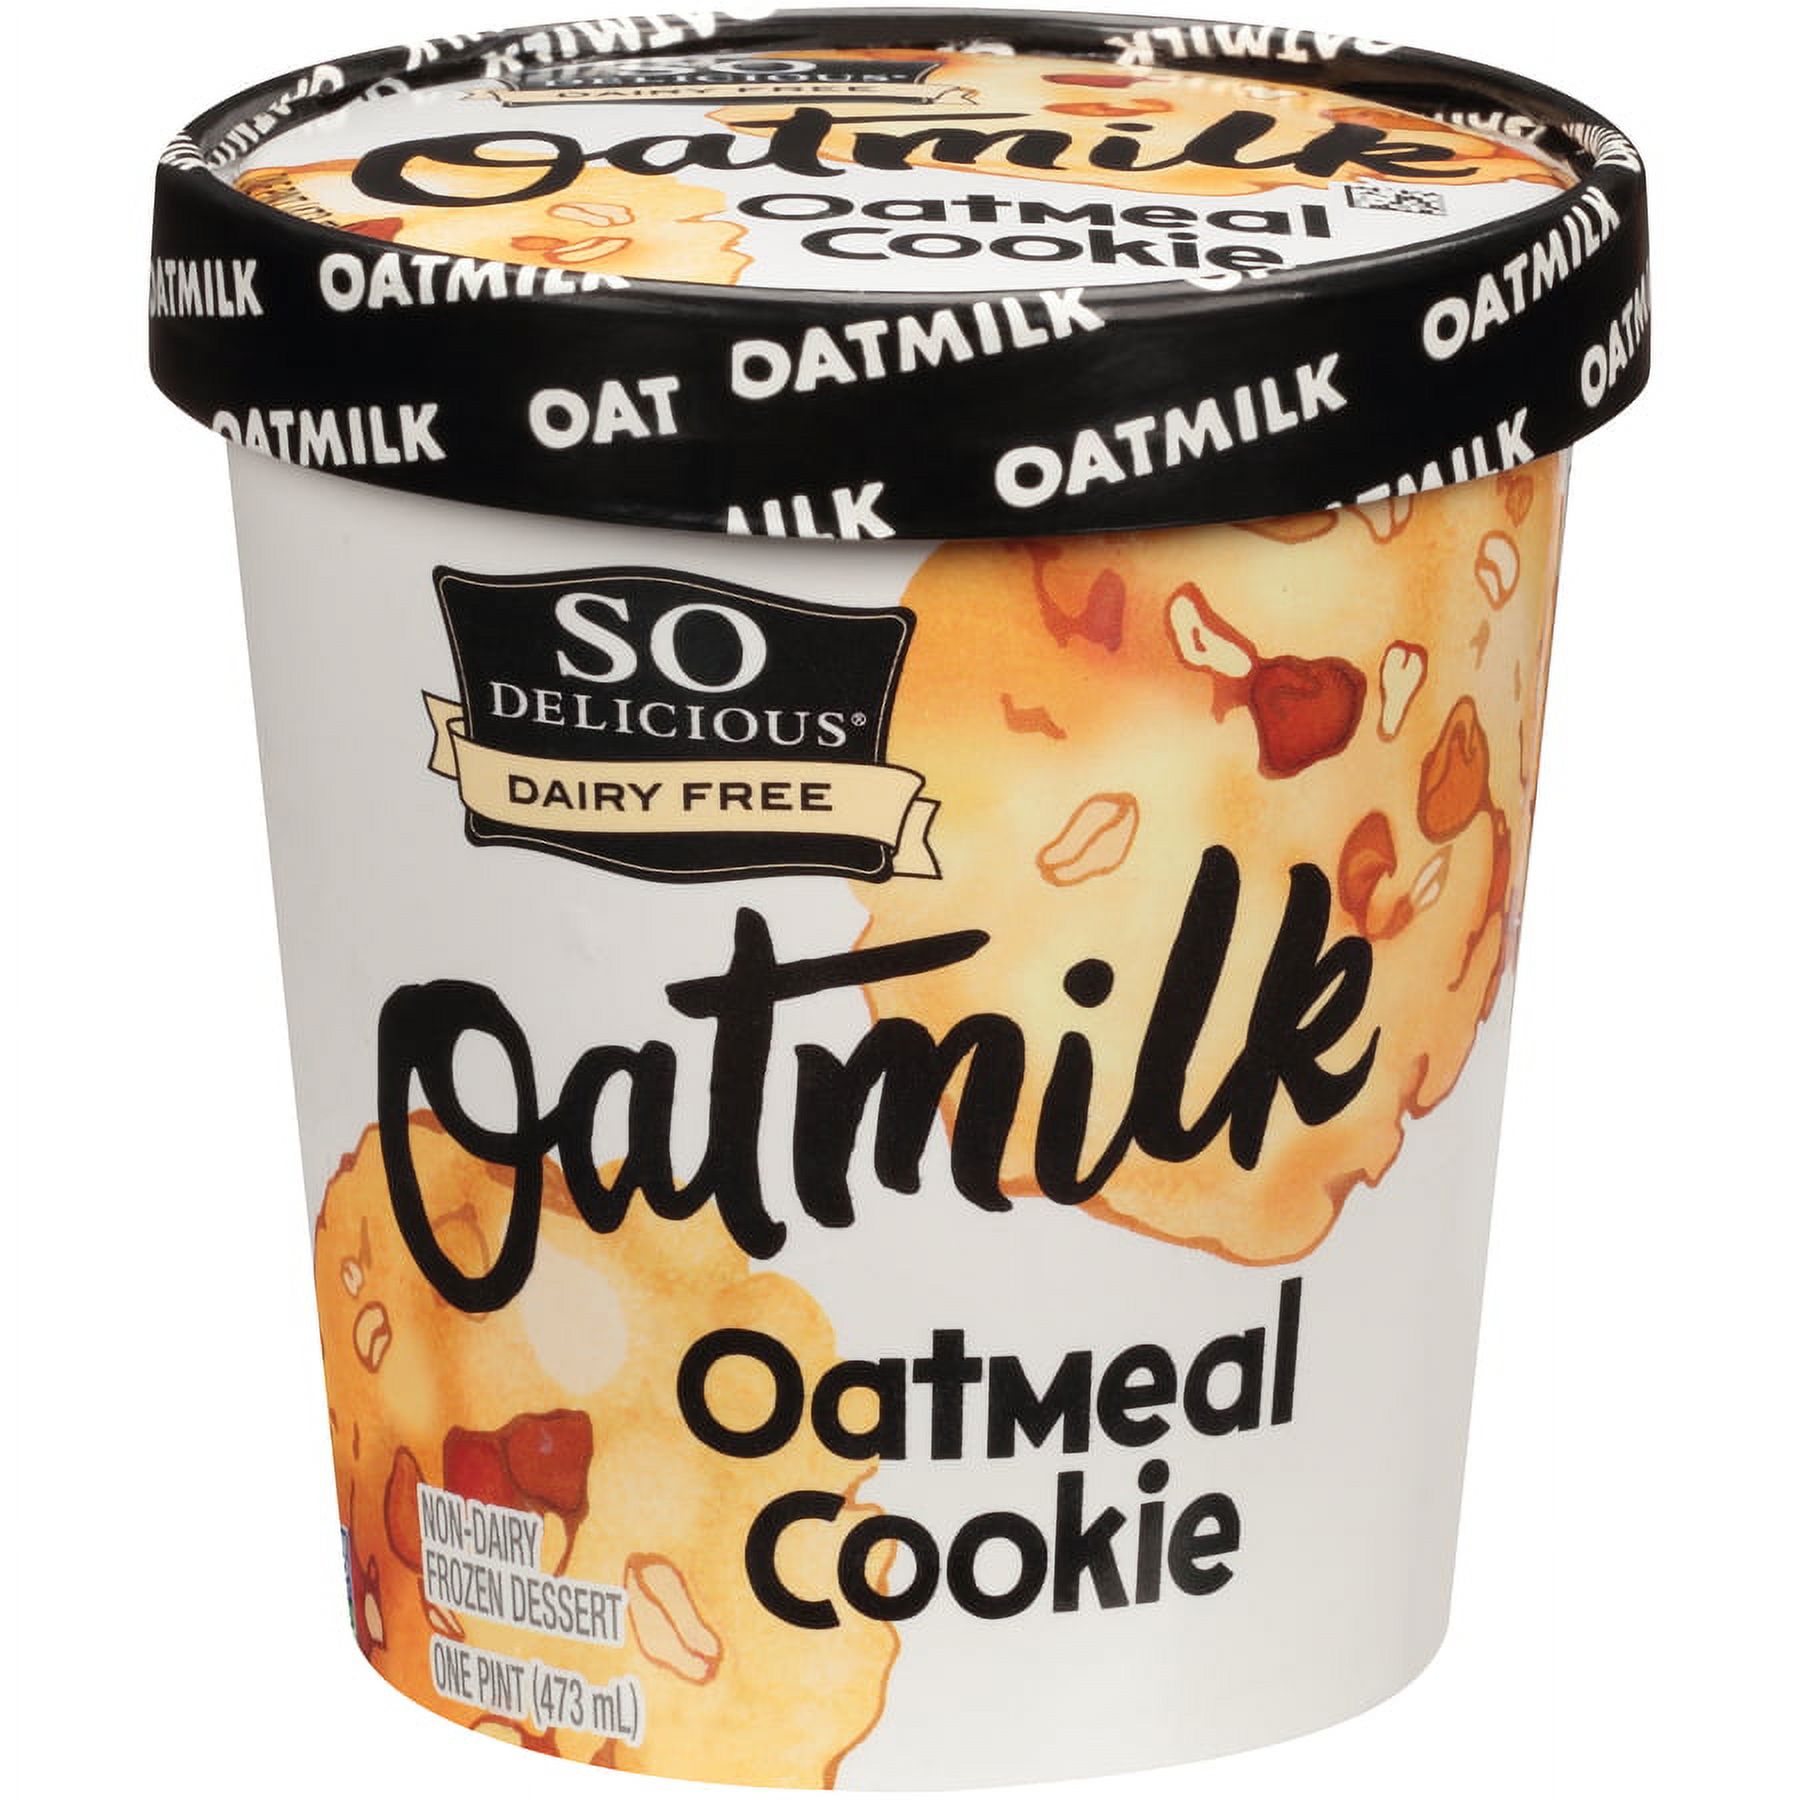 So Delicious® Dairy Free Oatmilk Oatmeal Cookie Non-Dairy Frozen Dessert 1 pt. Tub - image 1 of 5